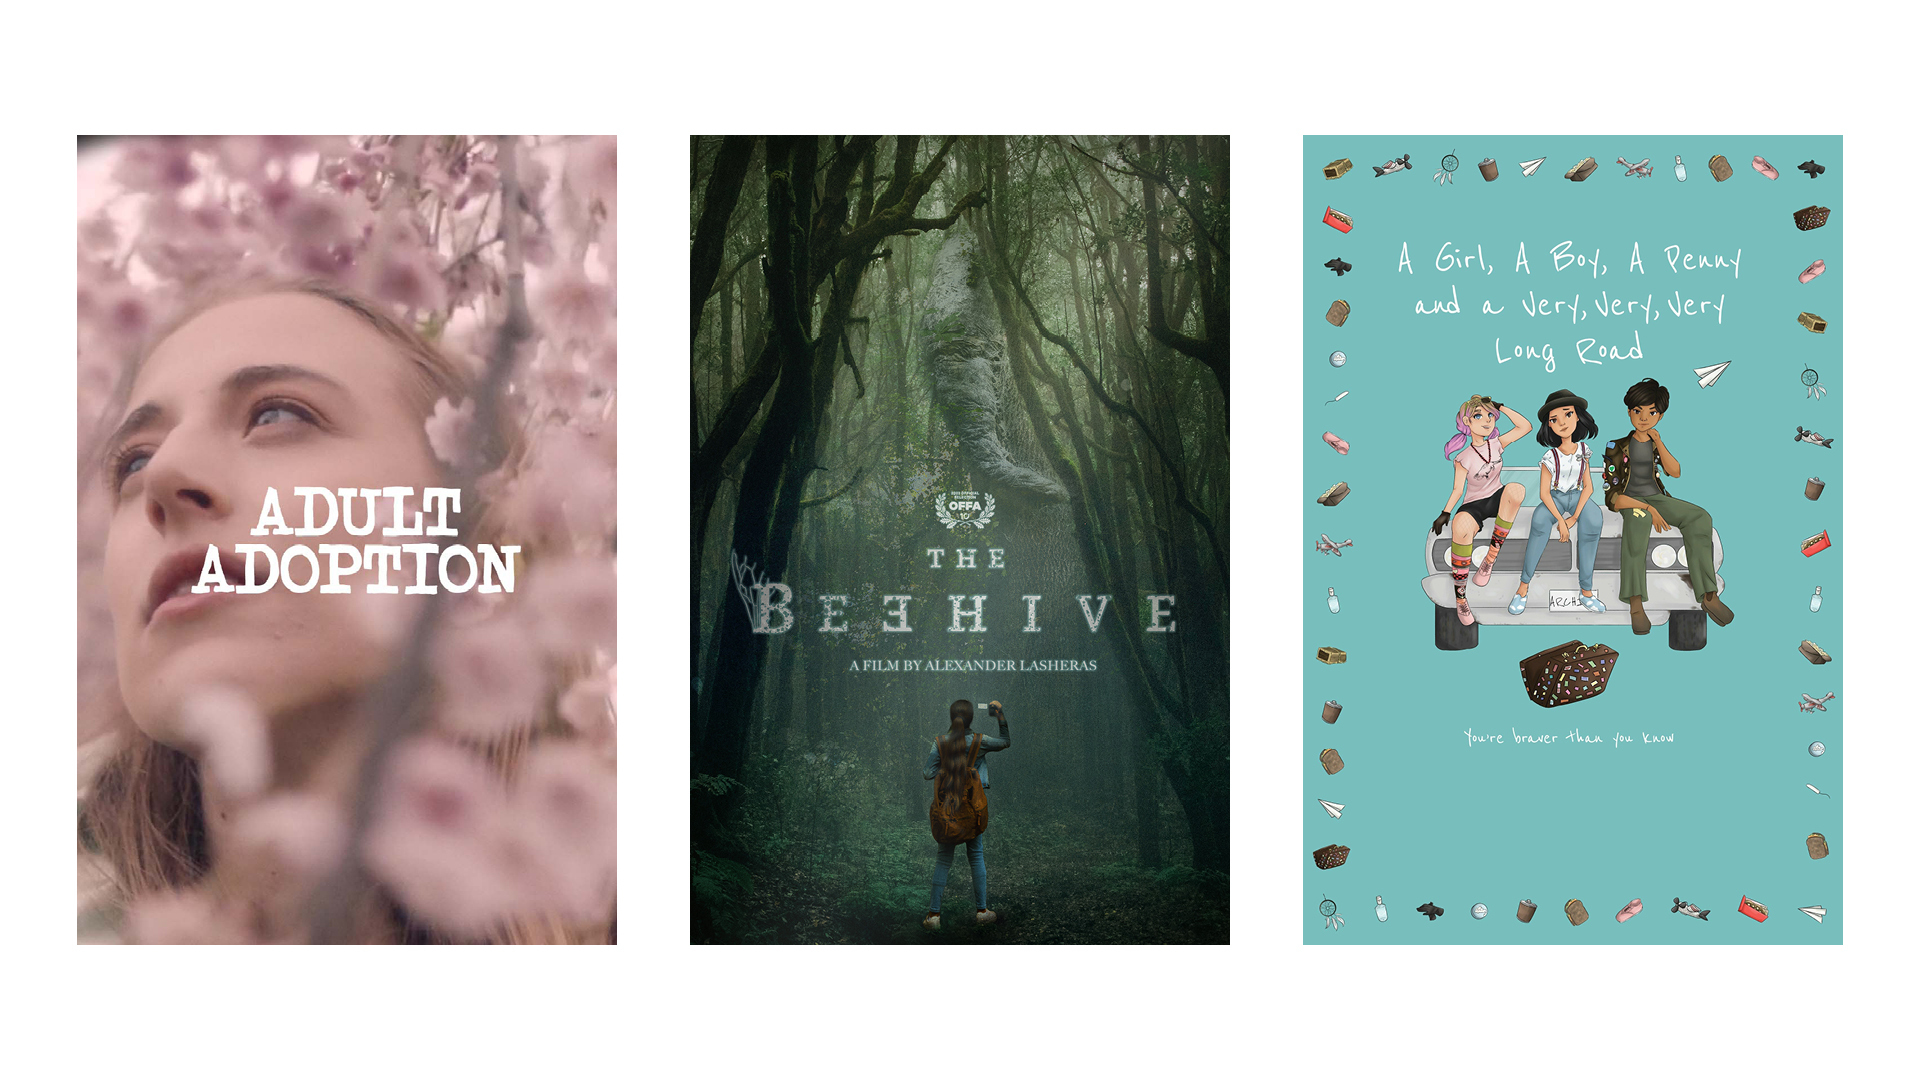 "Adult Adoption", "A Girl, a Boy, a Penny and a Very, Very, Very Long Road" and "The Beehive" posters